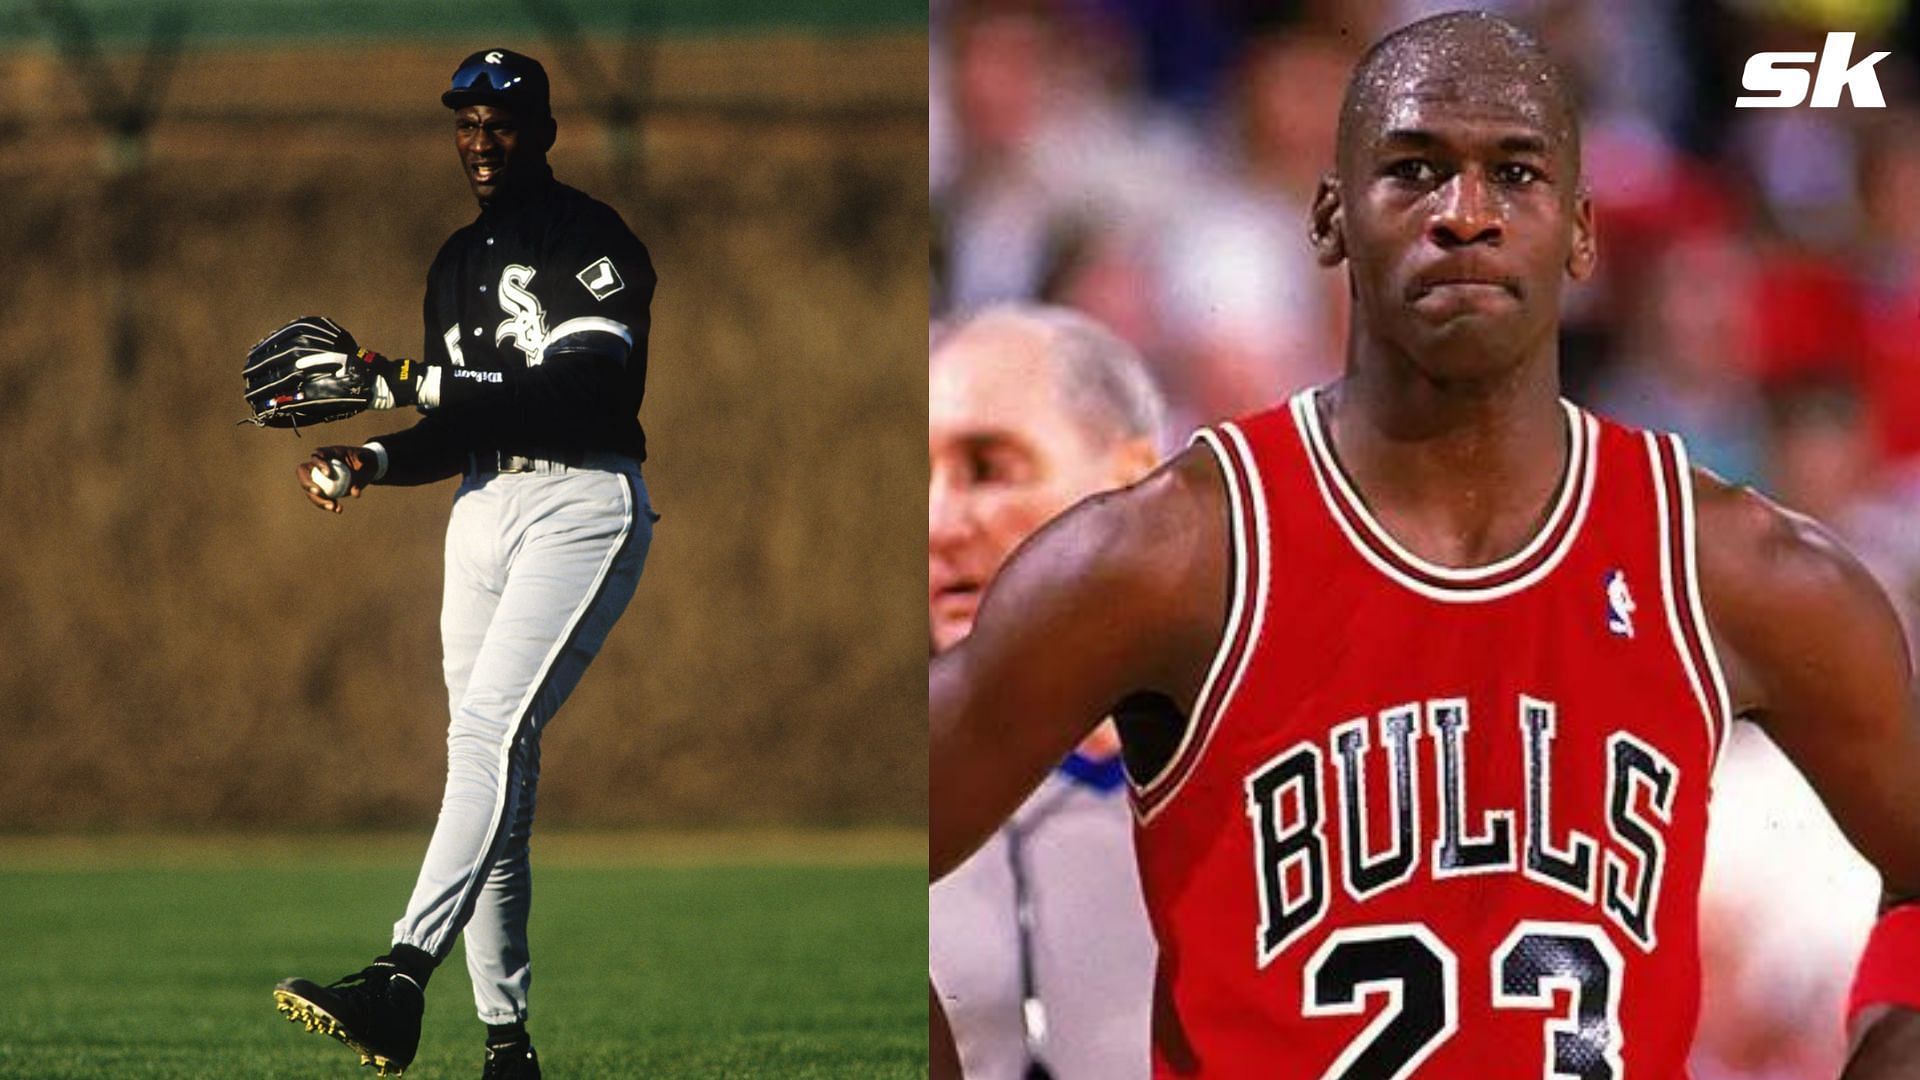 From 3x NBA champion to Chicago White Sox outfielder: The